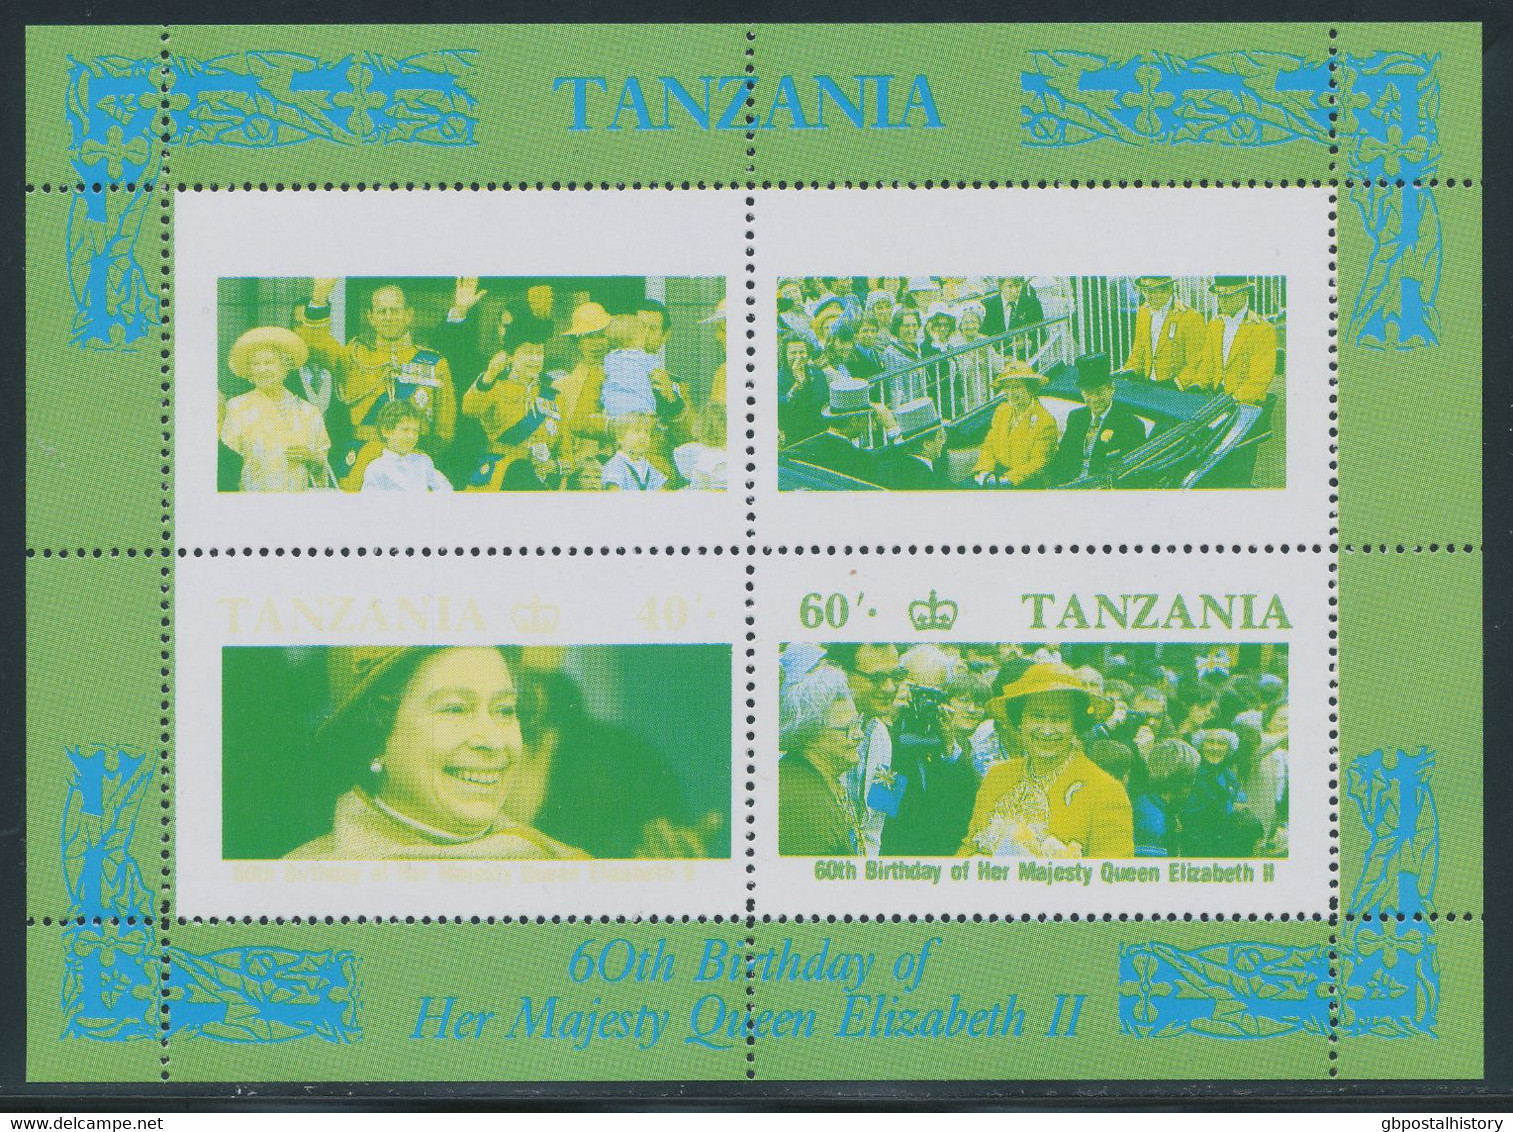 TANZANIA 1987, 60th Birthday Of Queen Elizabeth II, MAJOR VARIETY: Superb U/M MS With MISSING COLORS Red And Black, - Tanzanie (1964-...)